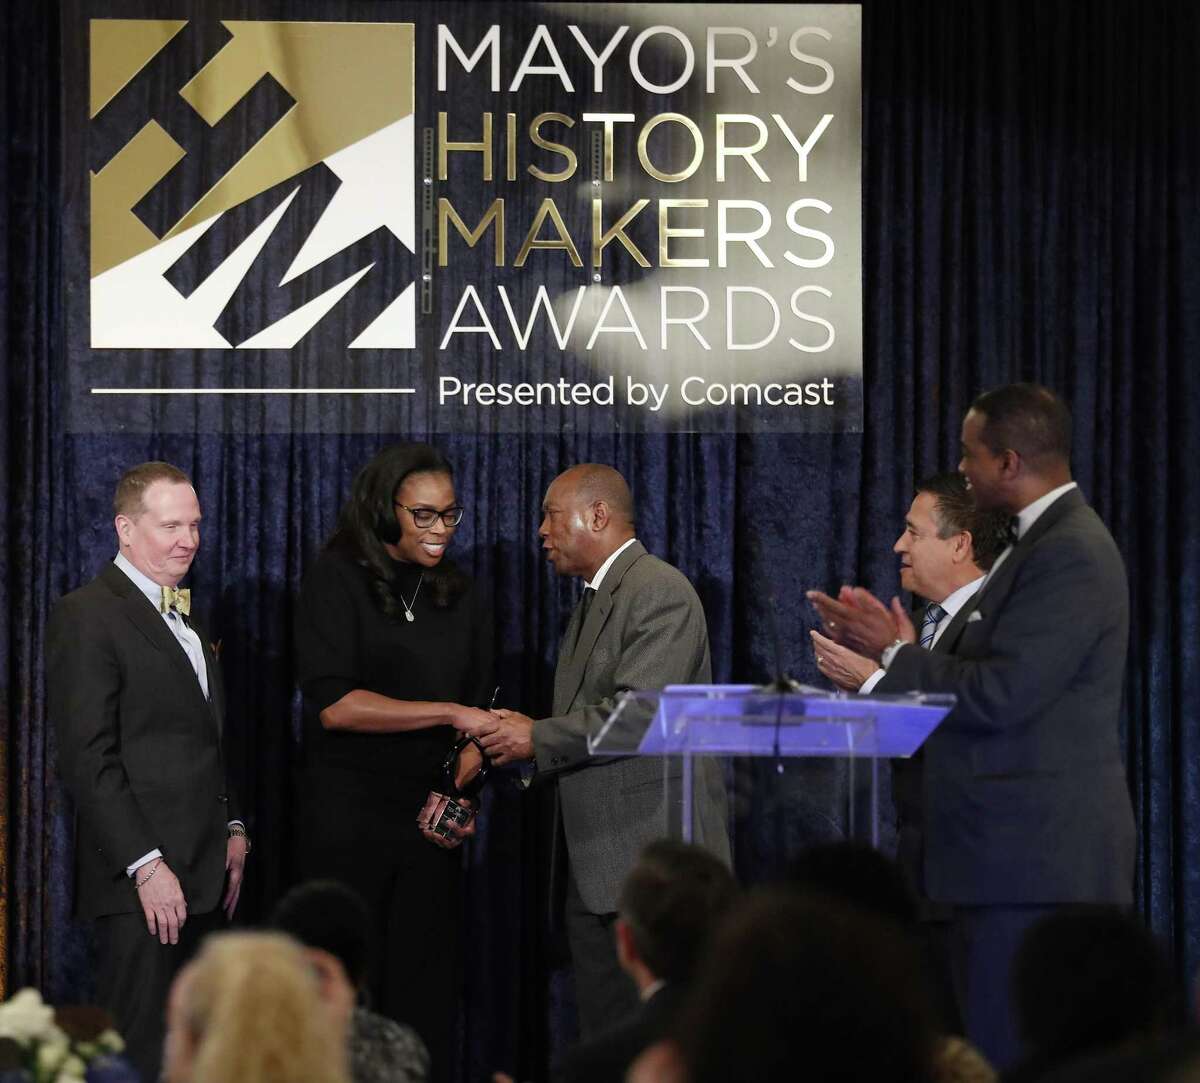 Honoree Tiffany Sanders during the Mayor Sylvester Turner's second annual History Makers Awards at the Houstonian Hotel, Friday, Feb. 8, 2019, in Houston.